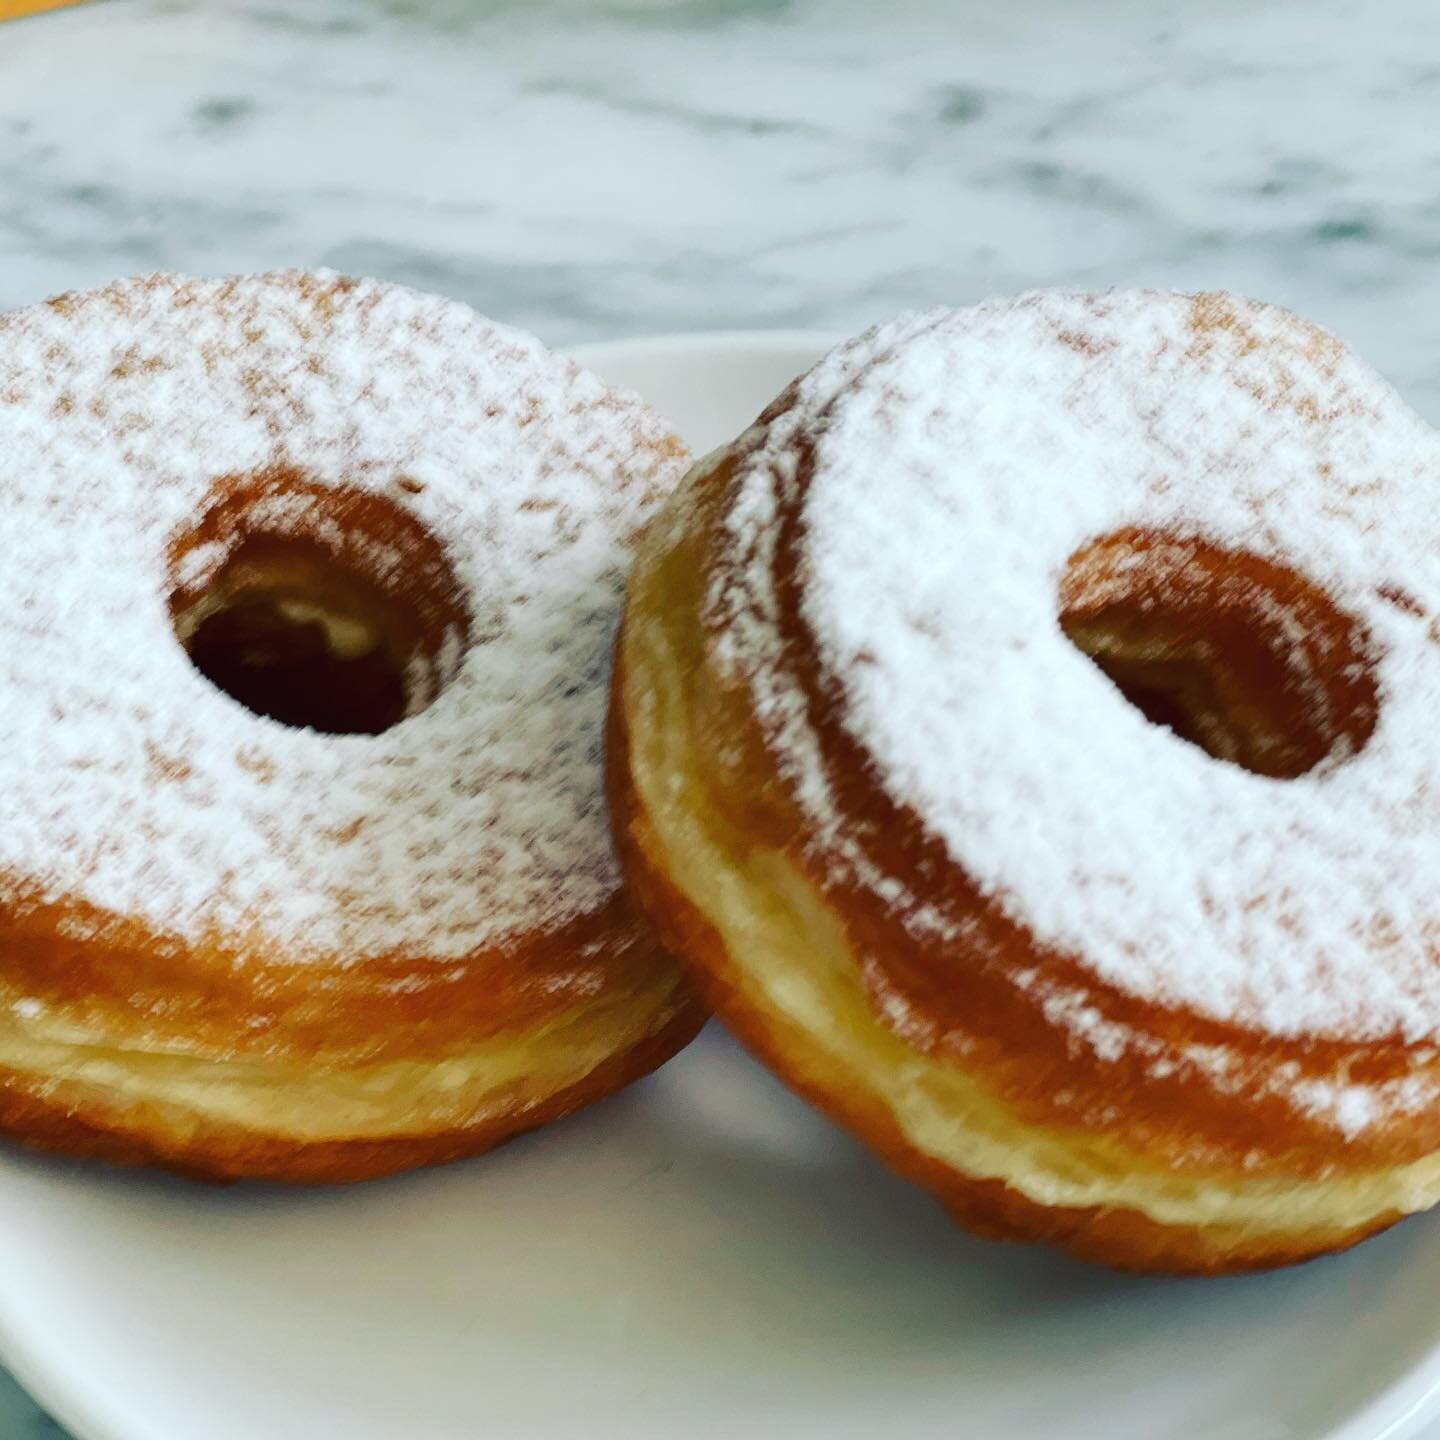 Cronut test complete. #bestbakery #ostervillevillage #capecod #pastry